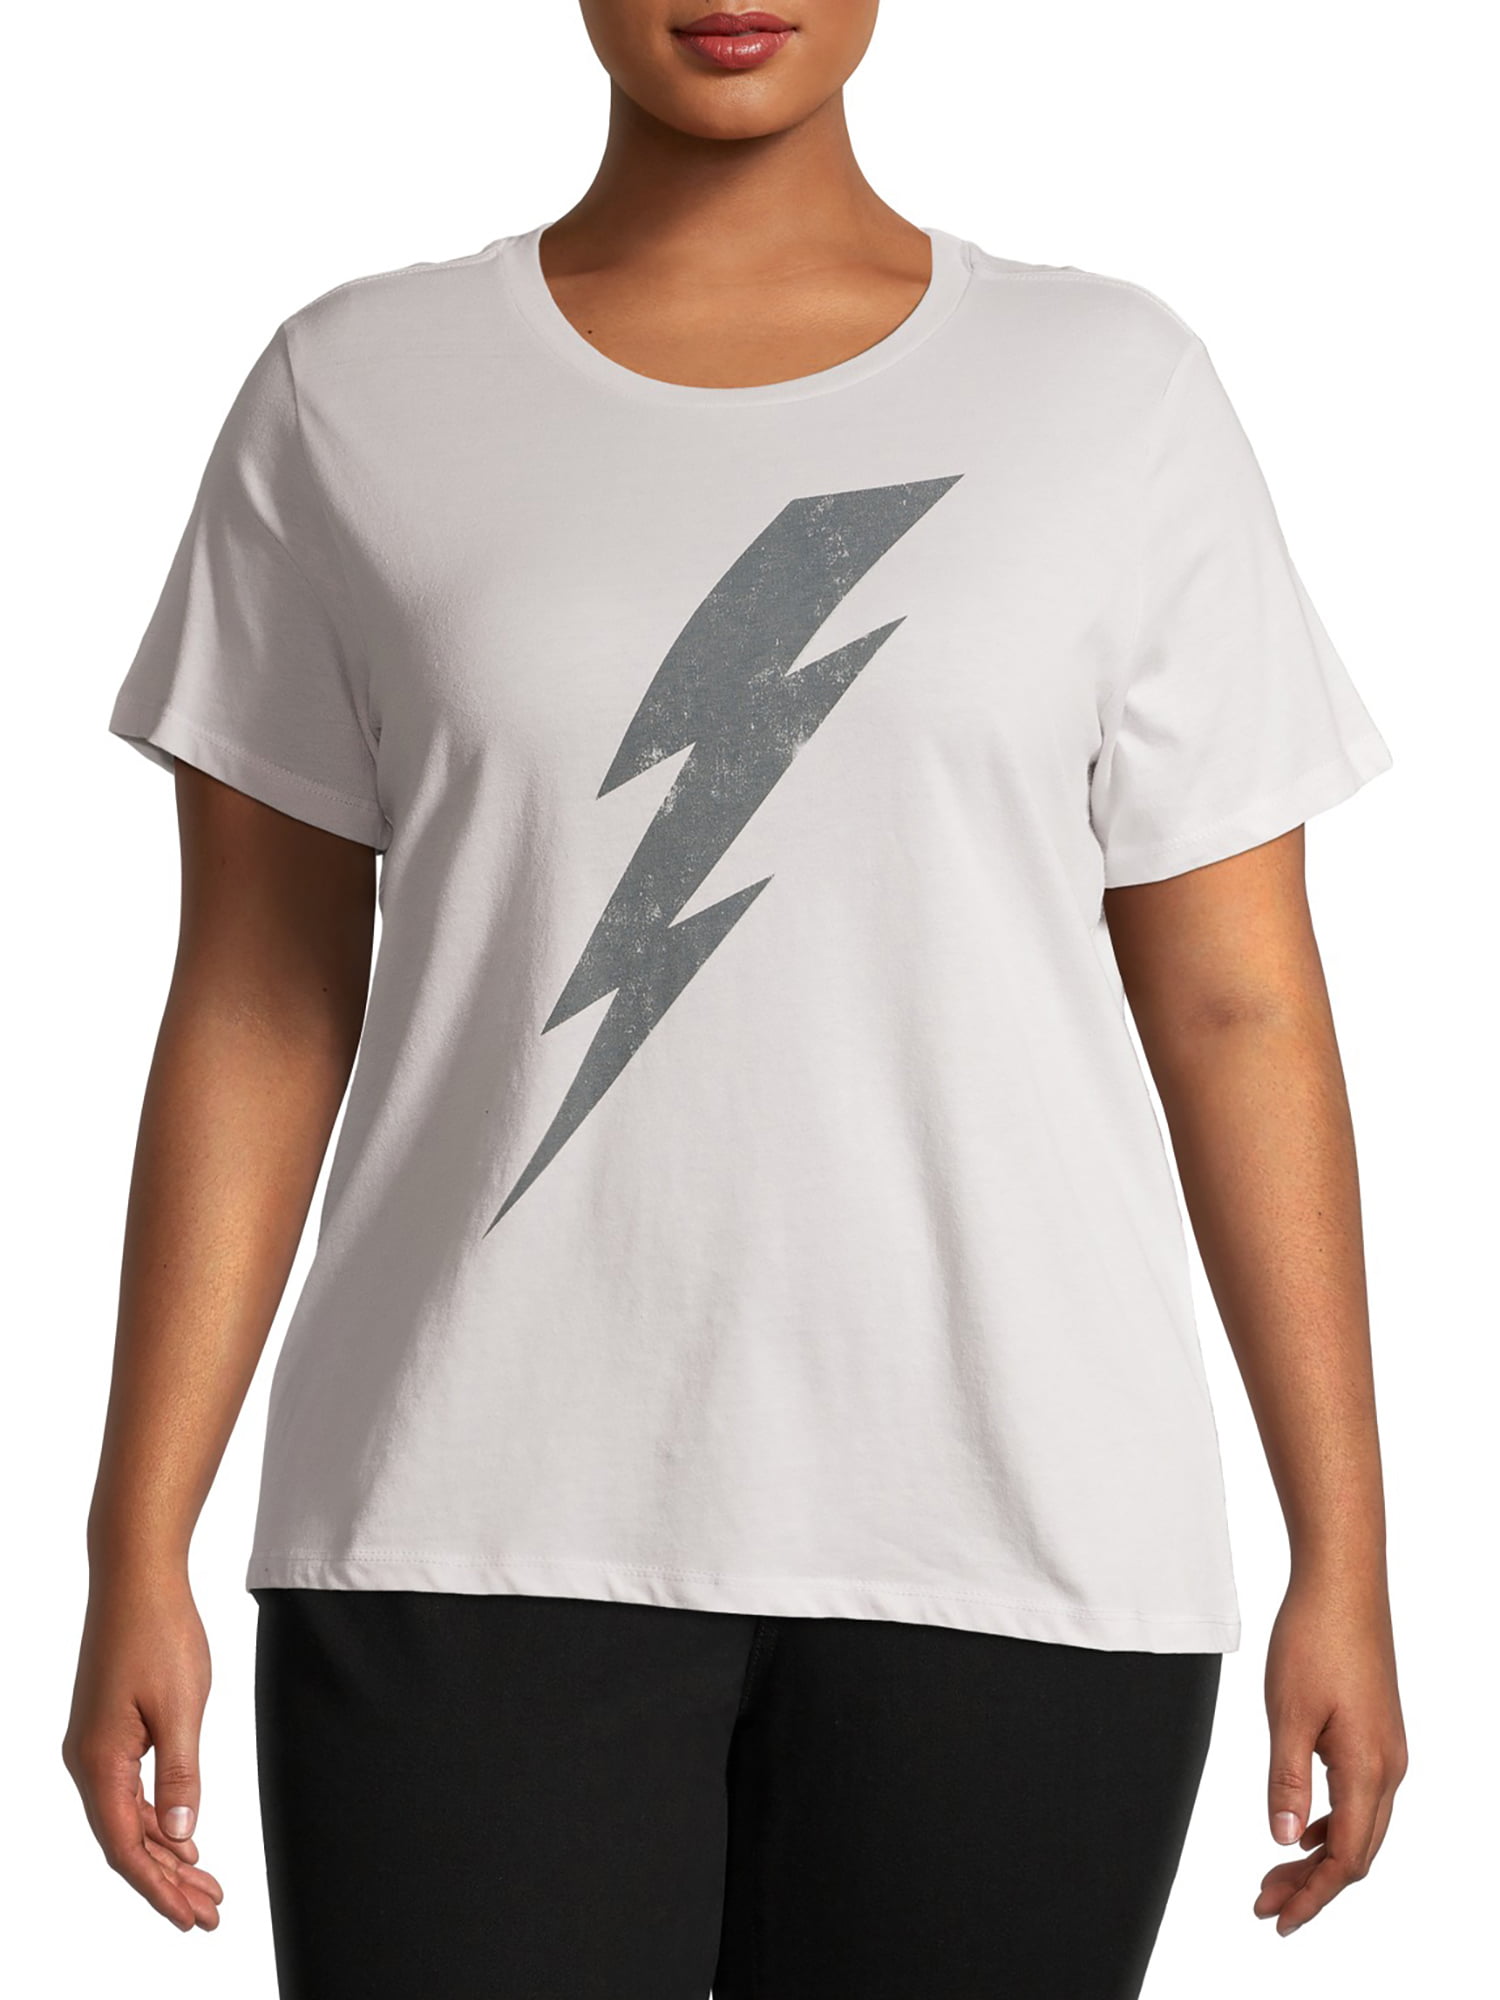 Gray by Grayson Social Women's Plus Size AC/DC Lightning Bolt Graphic  T-Shirt with Short Sleeves 